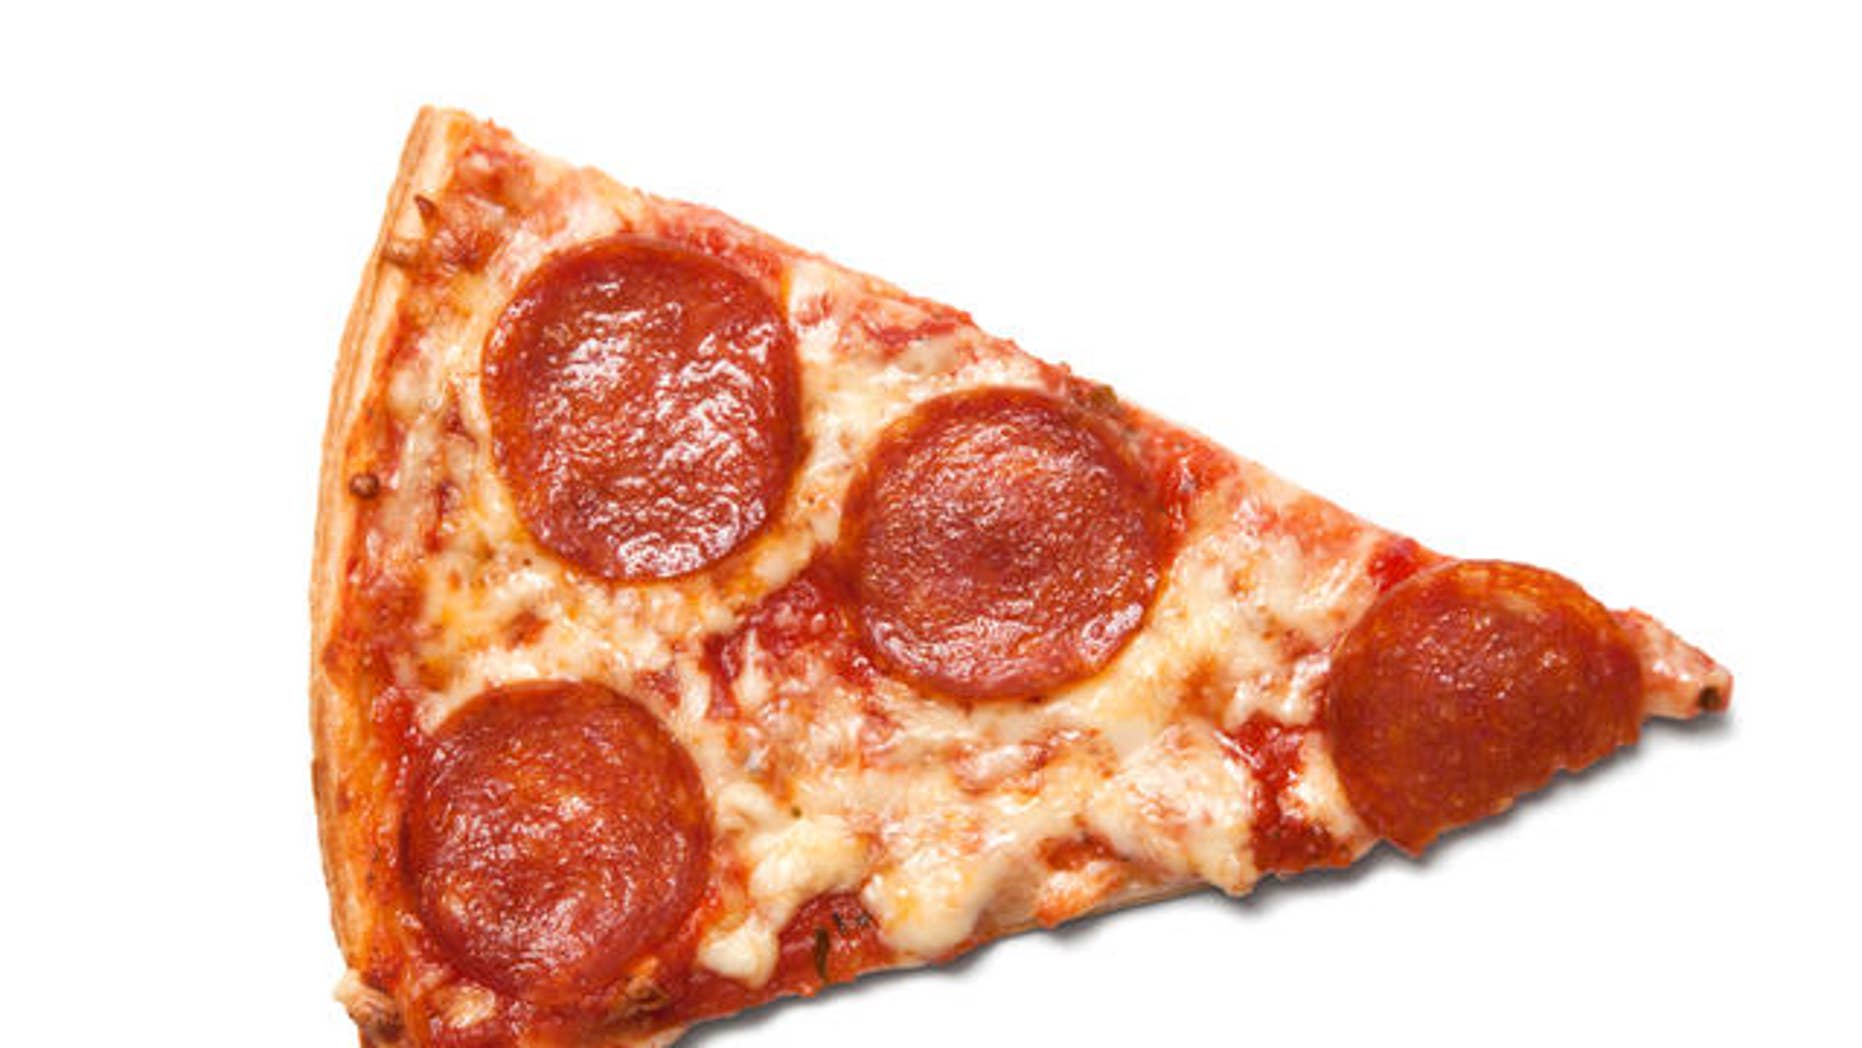 Pizza Hut 'Skinny Slice' uses the same dough, just less of it.